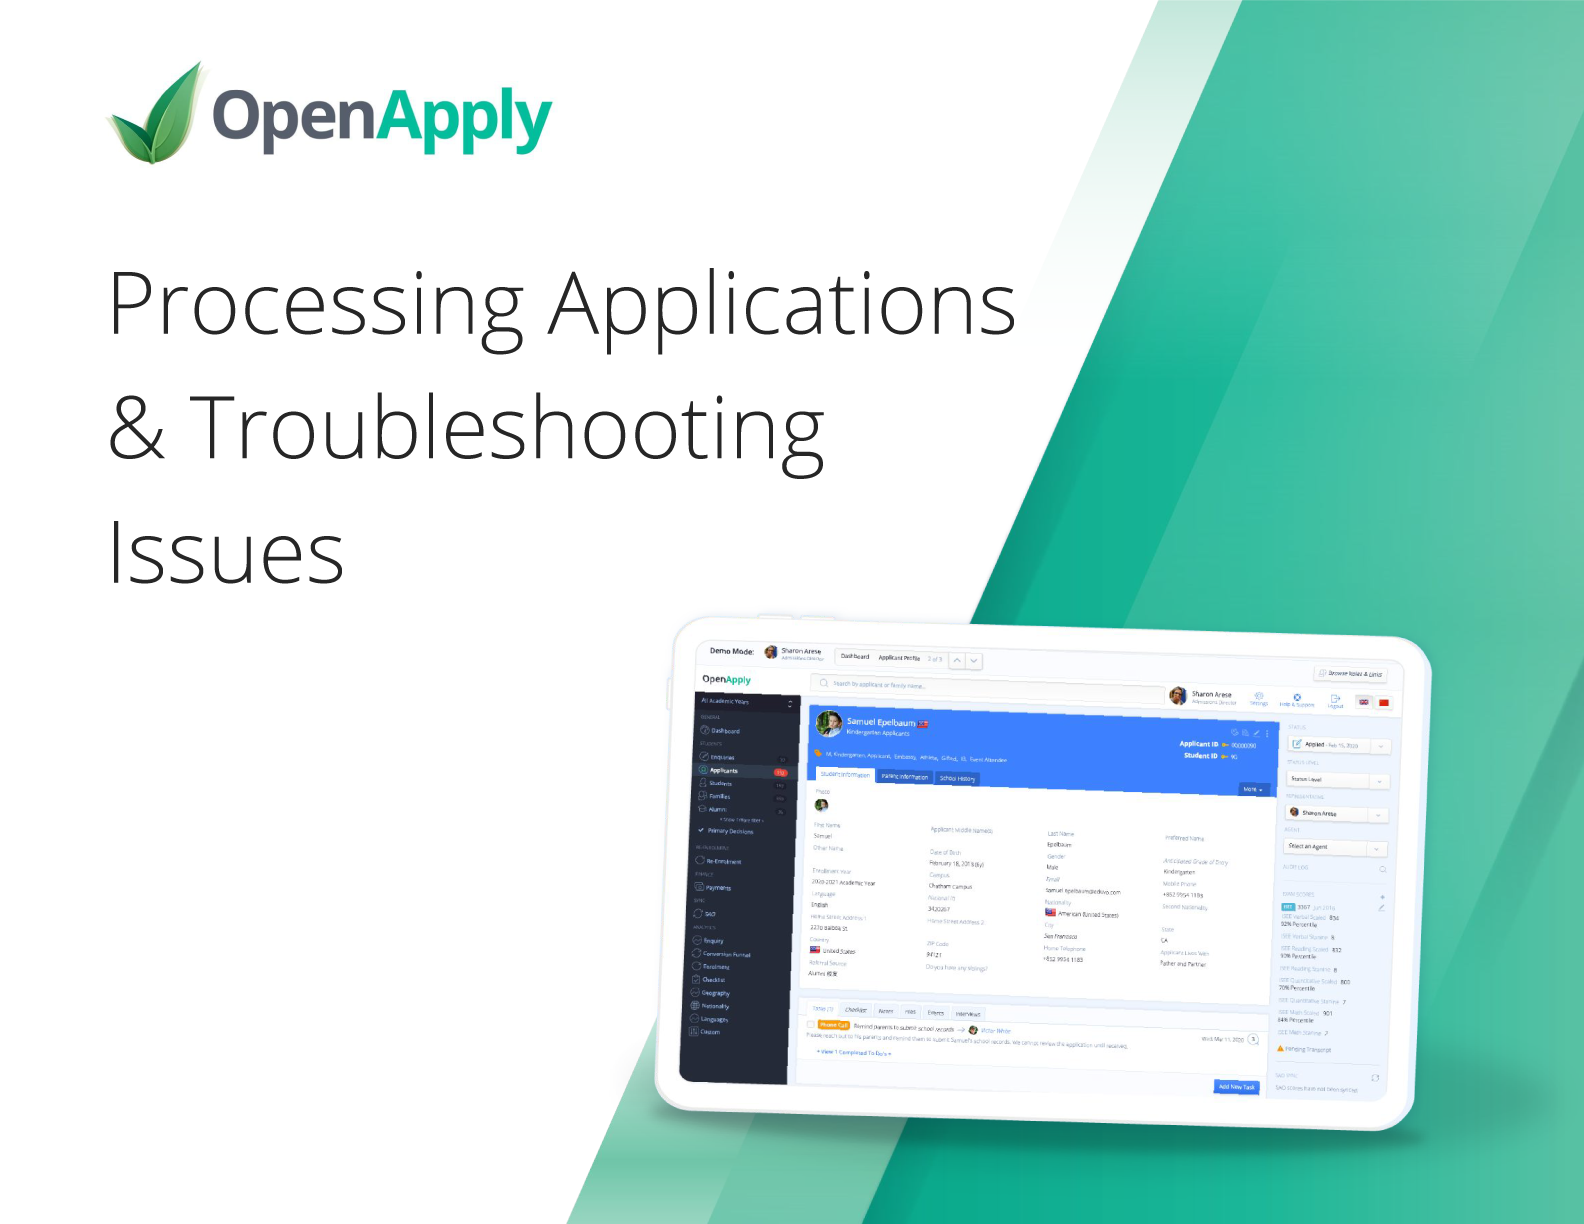 OpenApply QuickStart Guide: Processing Applications & Troubleshooting Issues